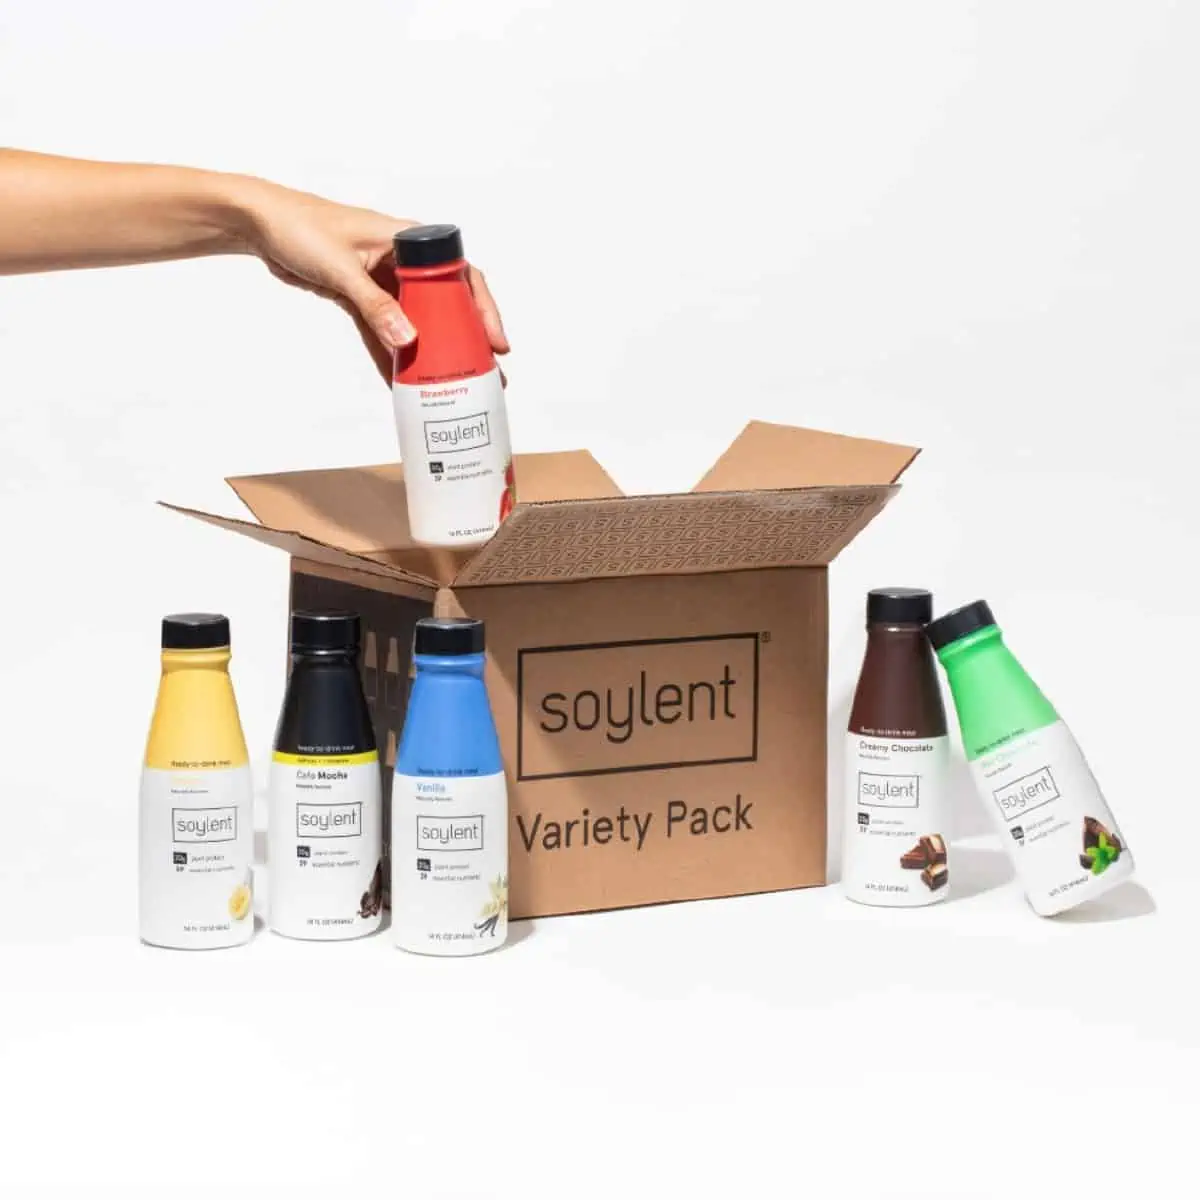 A hand placing a bottle of Soylent plant-based ready-to-drink shake into a cardboard box with five other shake flavors next to the box.